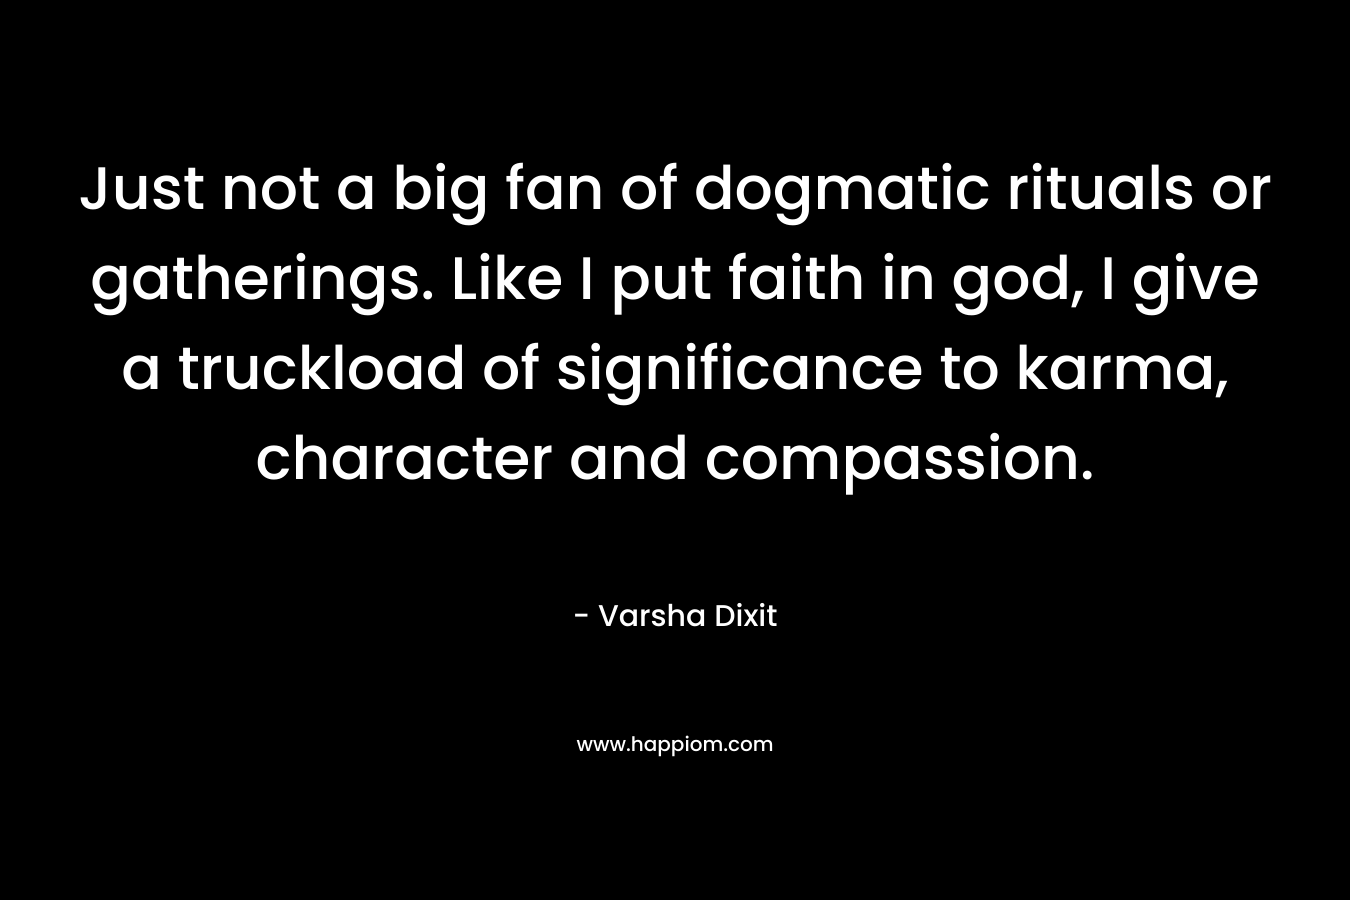 Just not a big fan of dogmatic rituals or gatherings. Like I put faith in god, I give a truckload of significance to karma, character and compassion. – Varsha Dixit